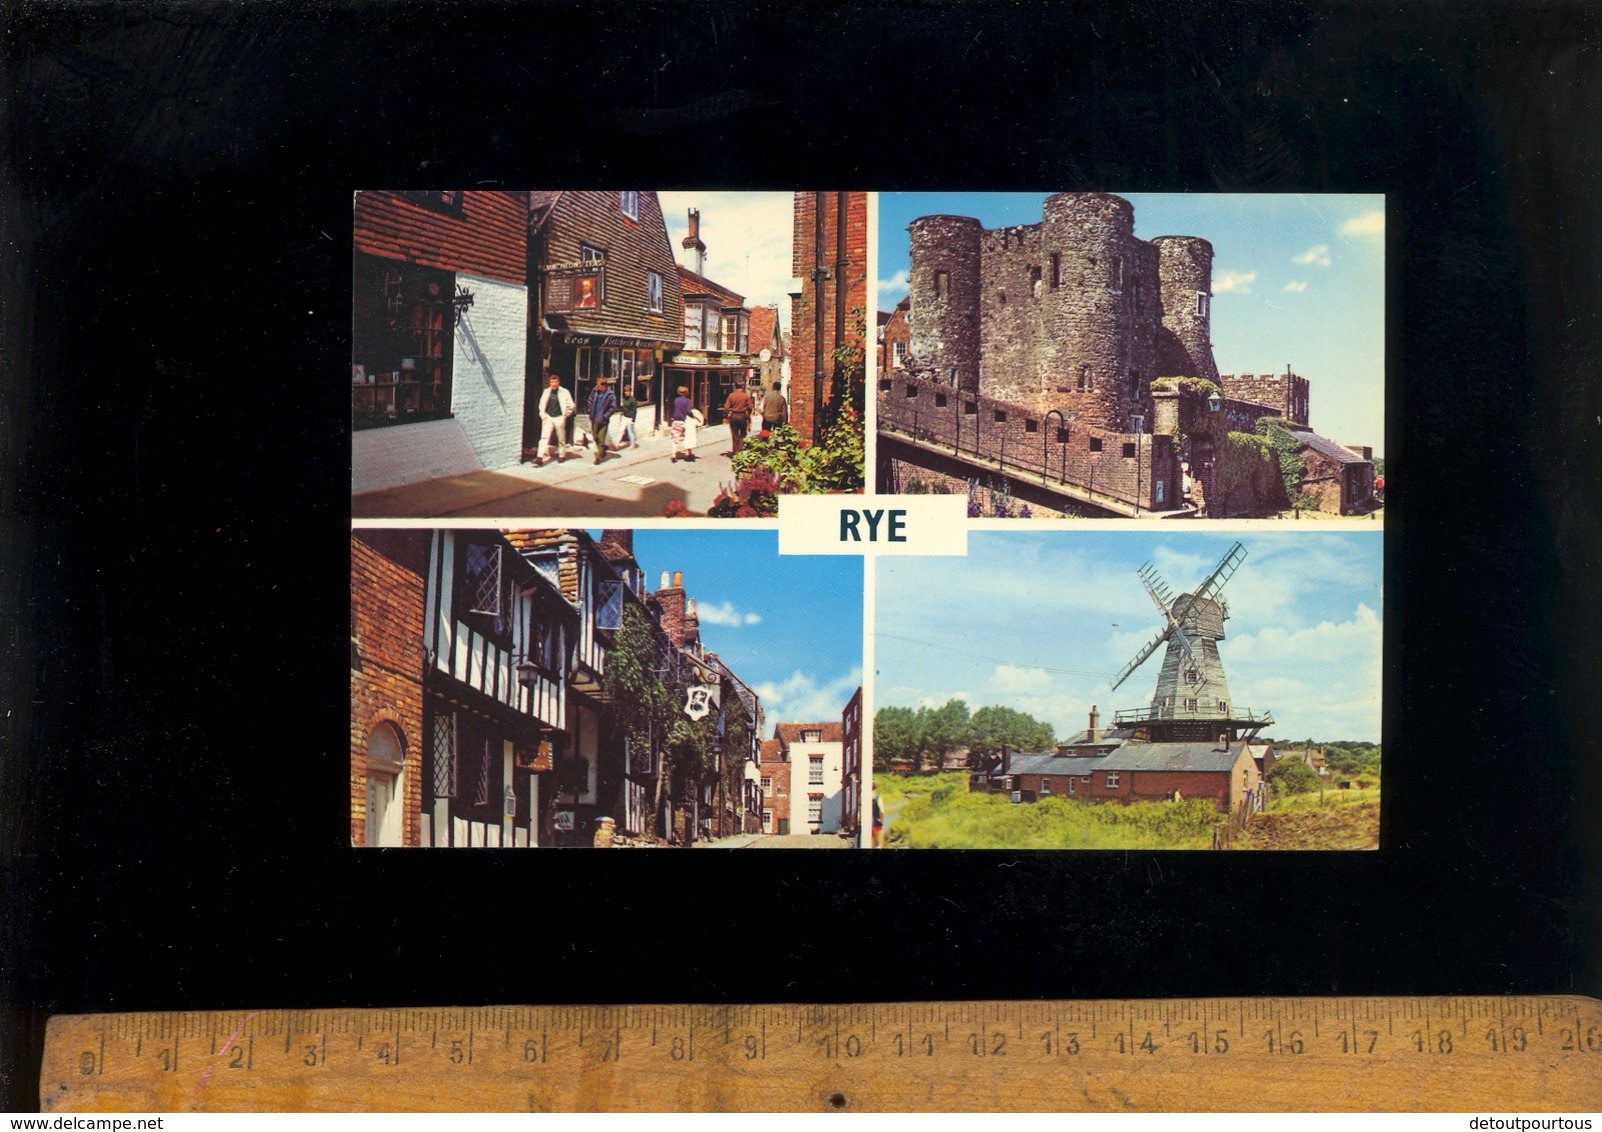 RYE Sussex : 4 Views Of The Town On The Same Postcard Lion & Mermaid Street Ypres Tower Castle White Windmill - Rye